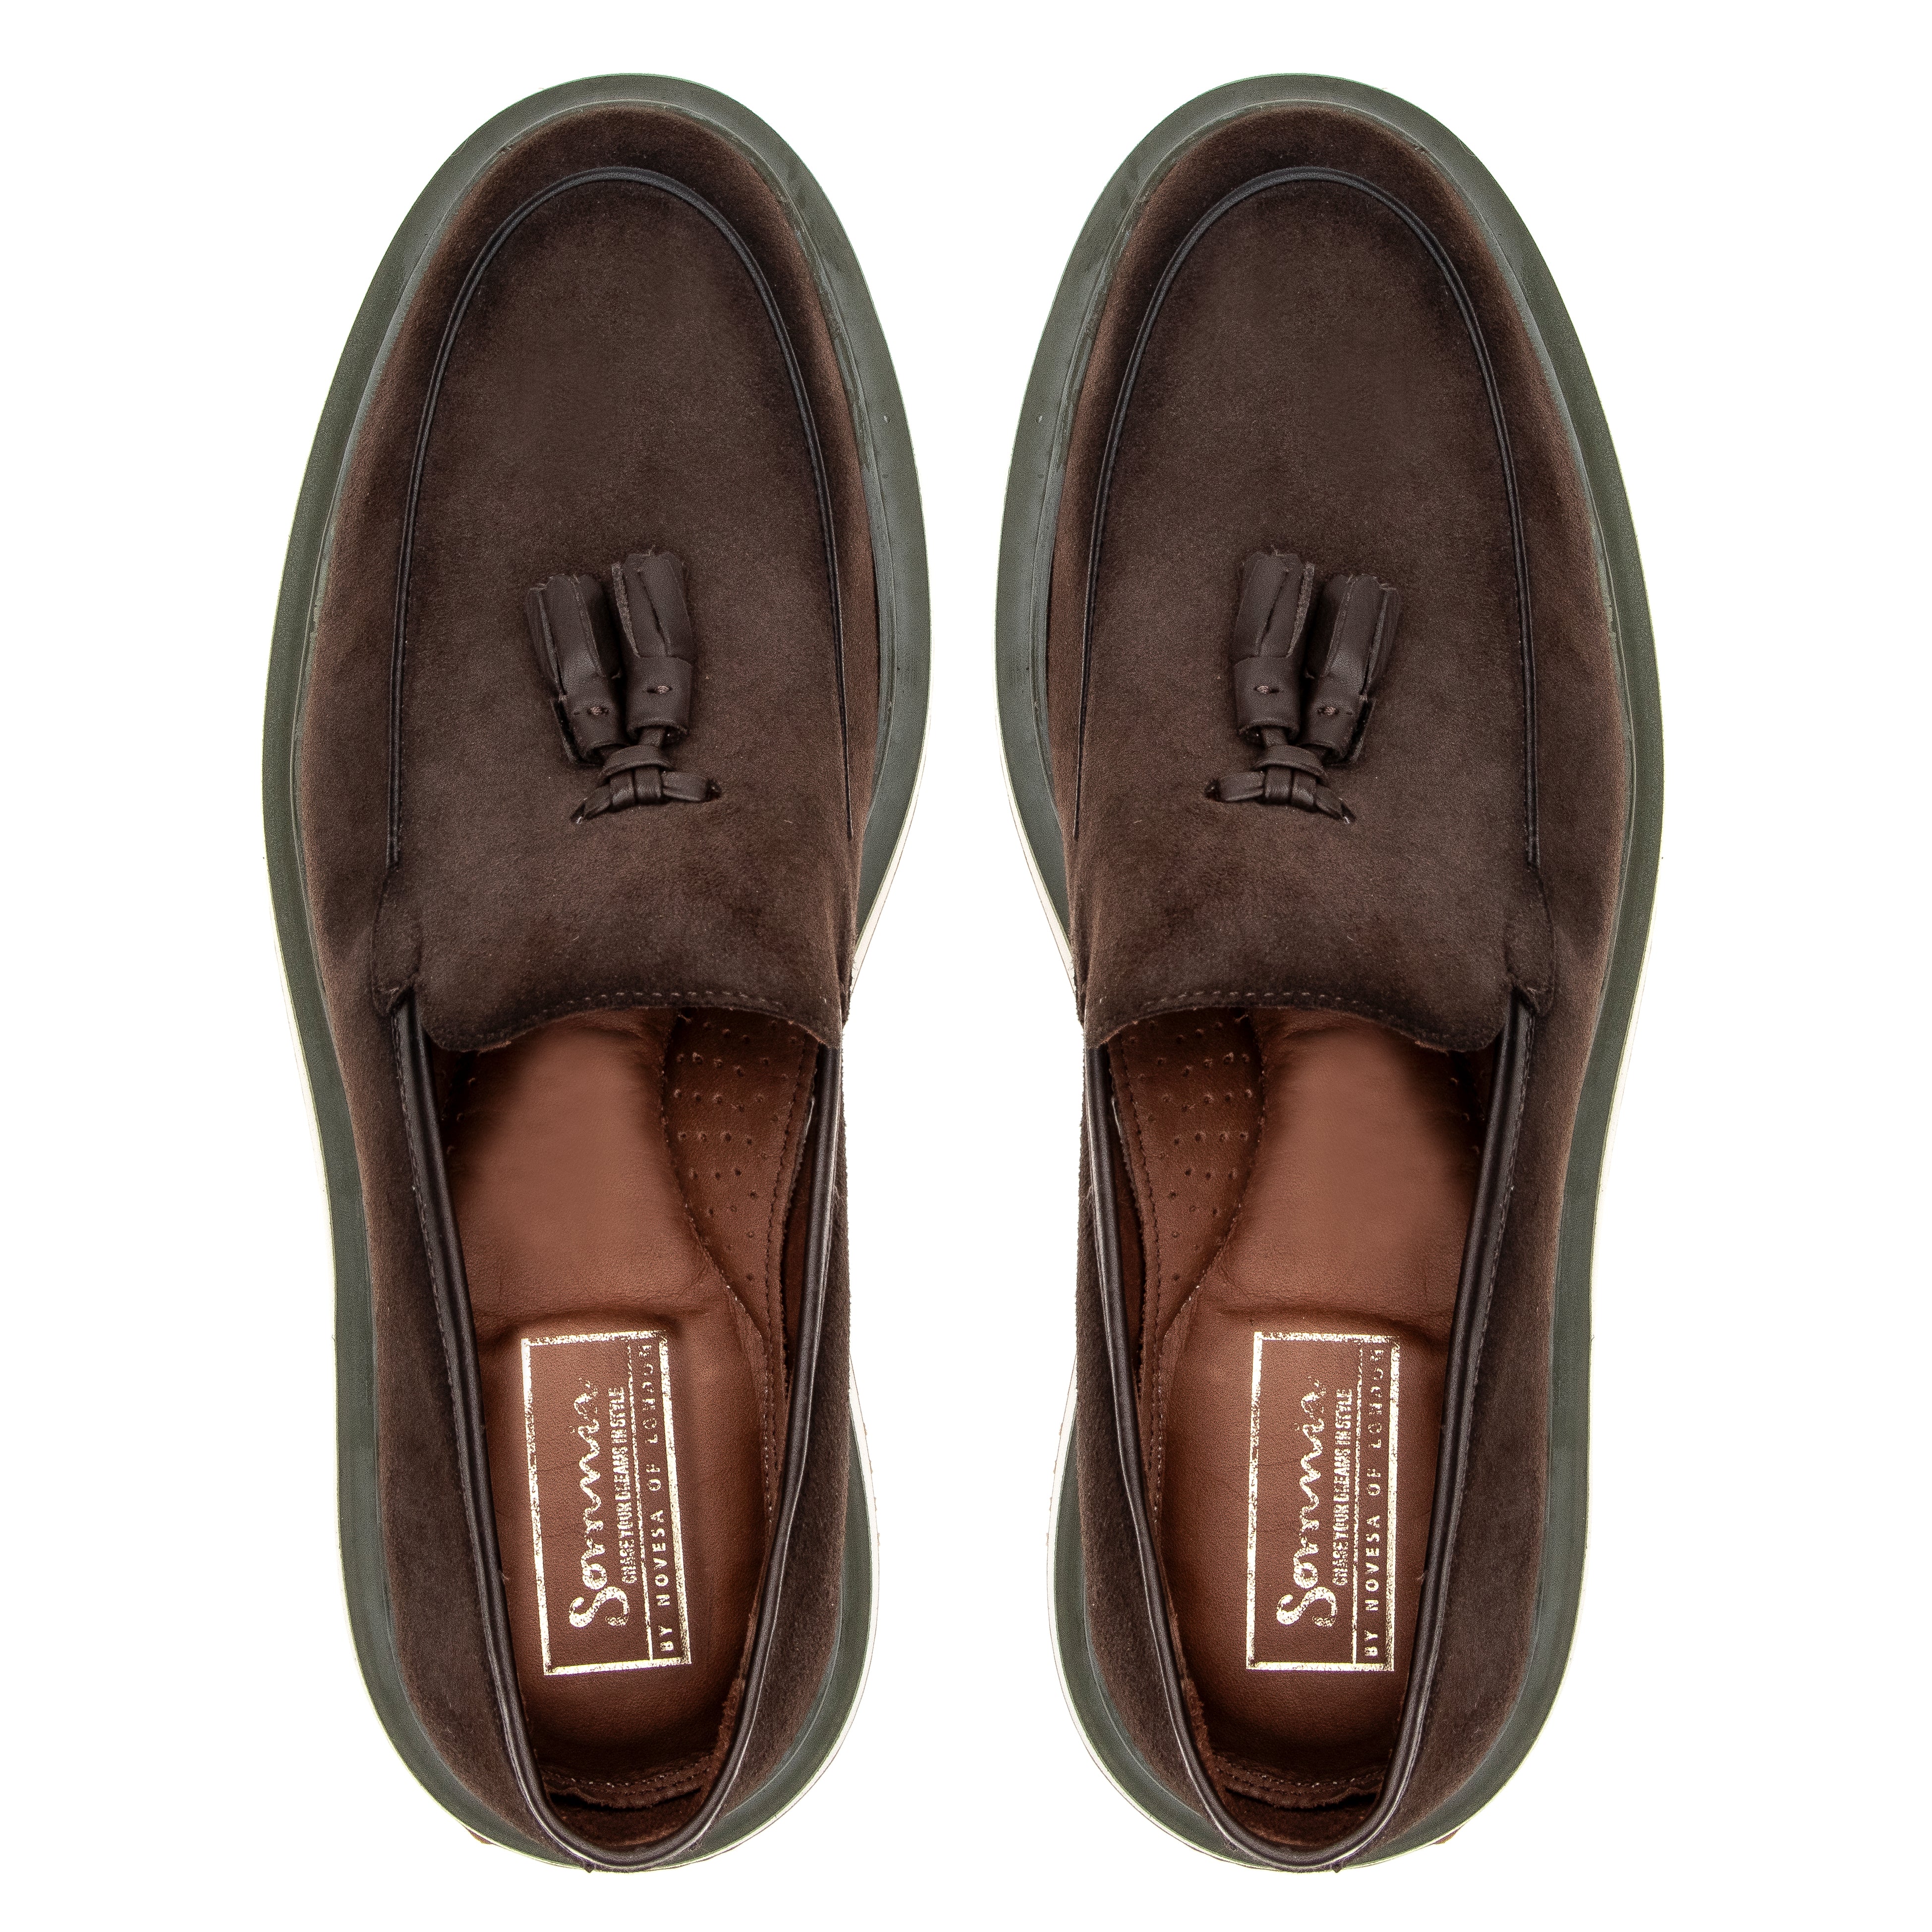 Marcus Raised Loafer - Brown